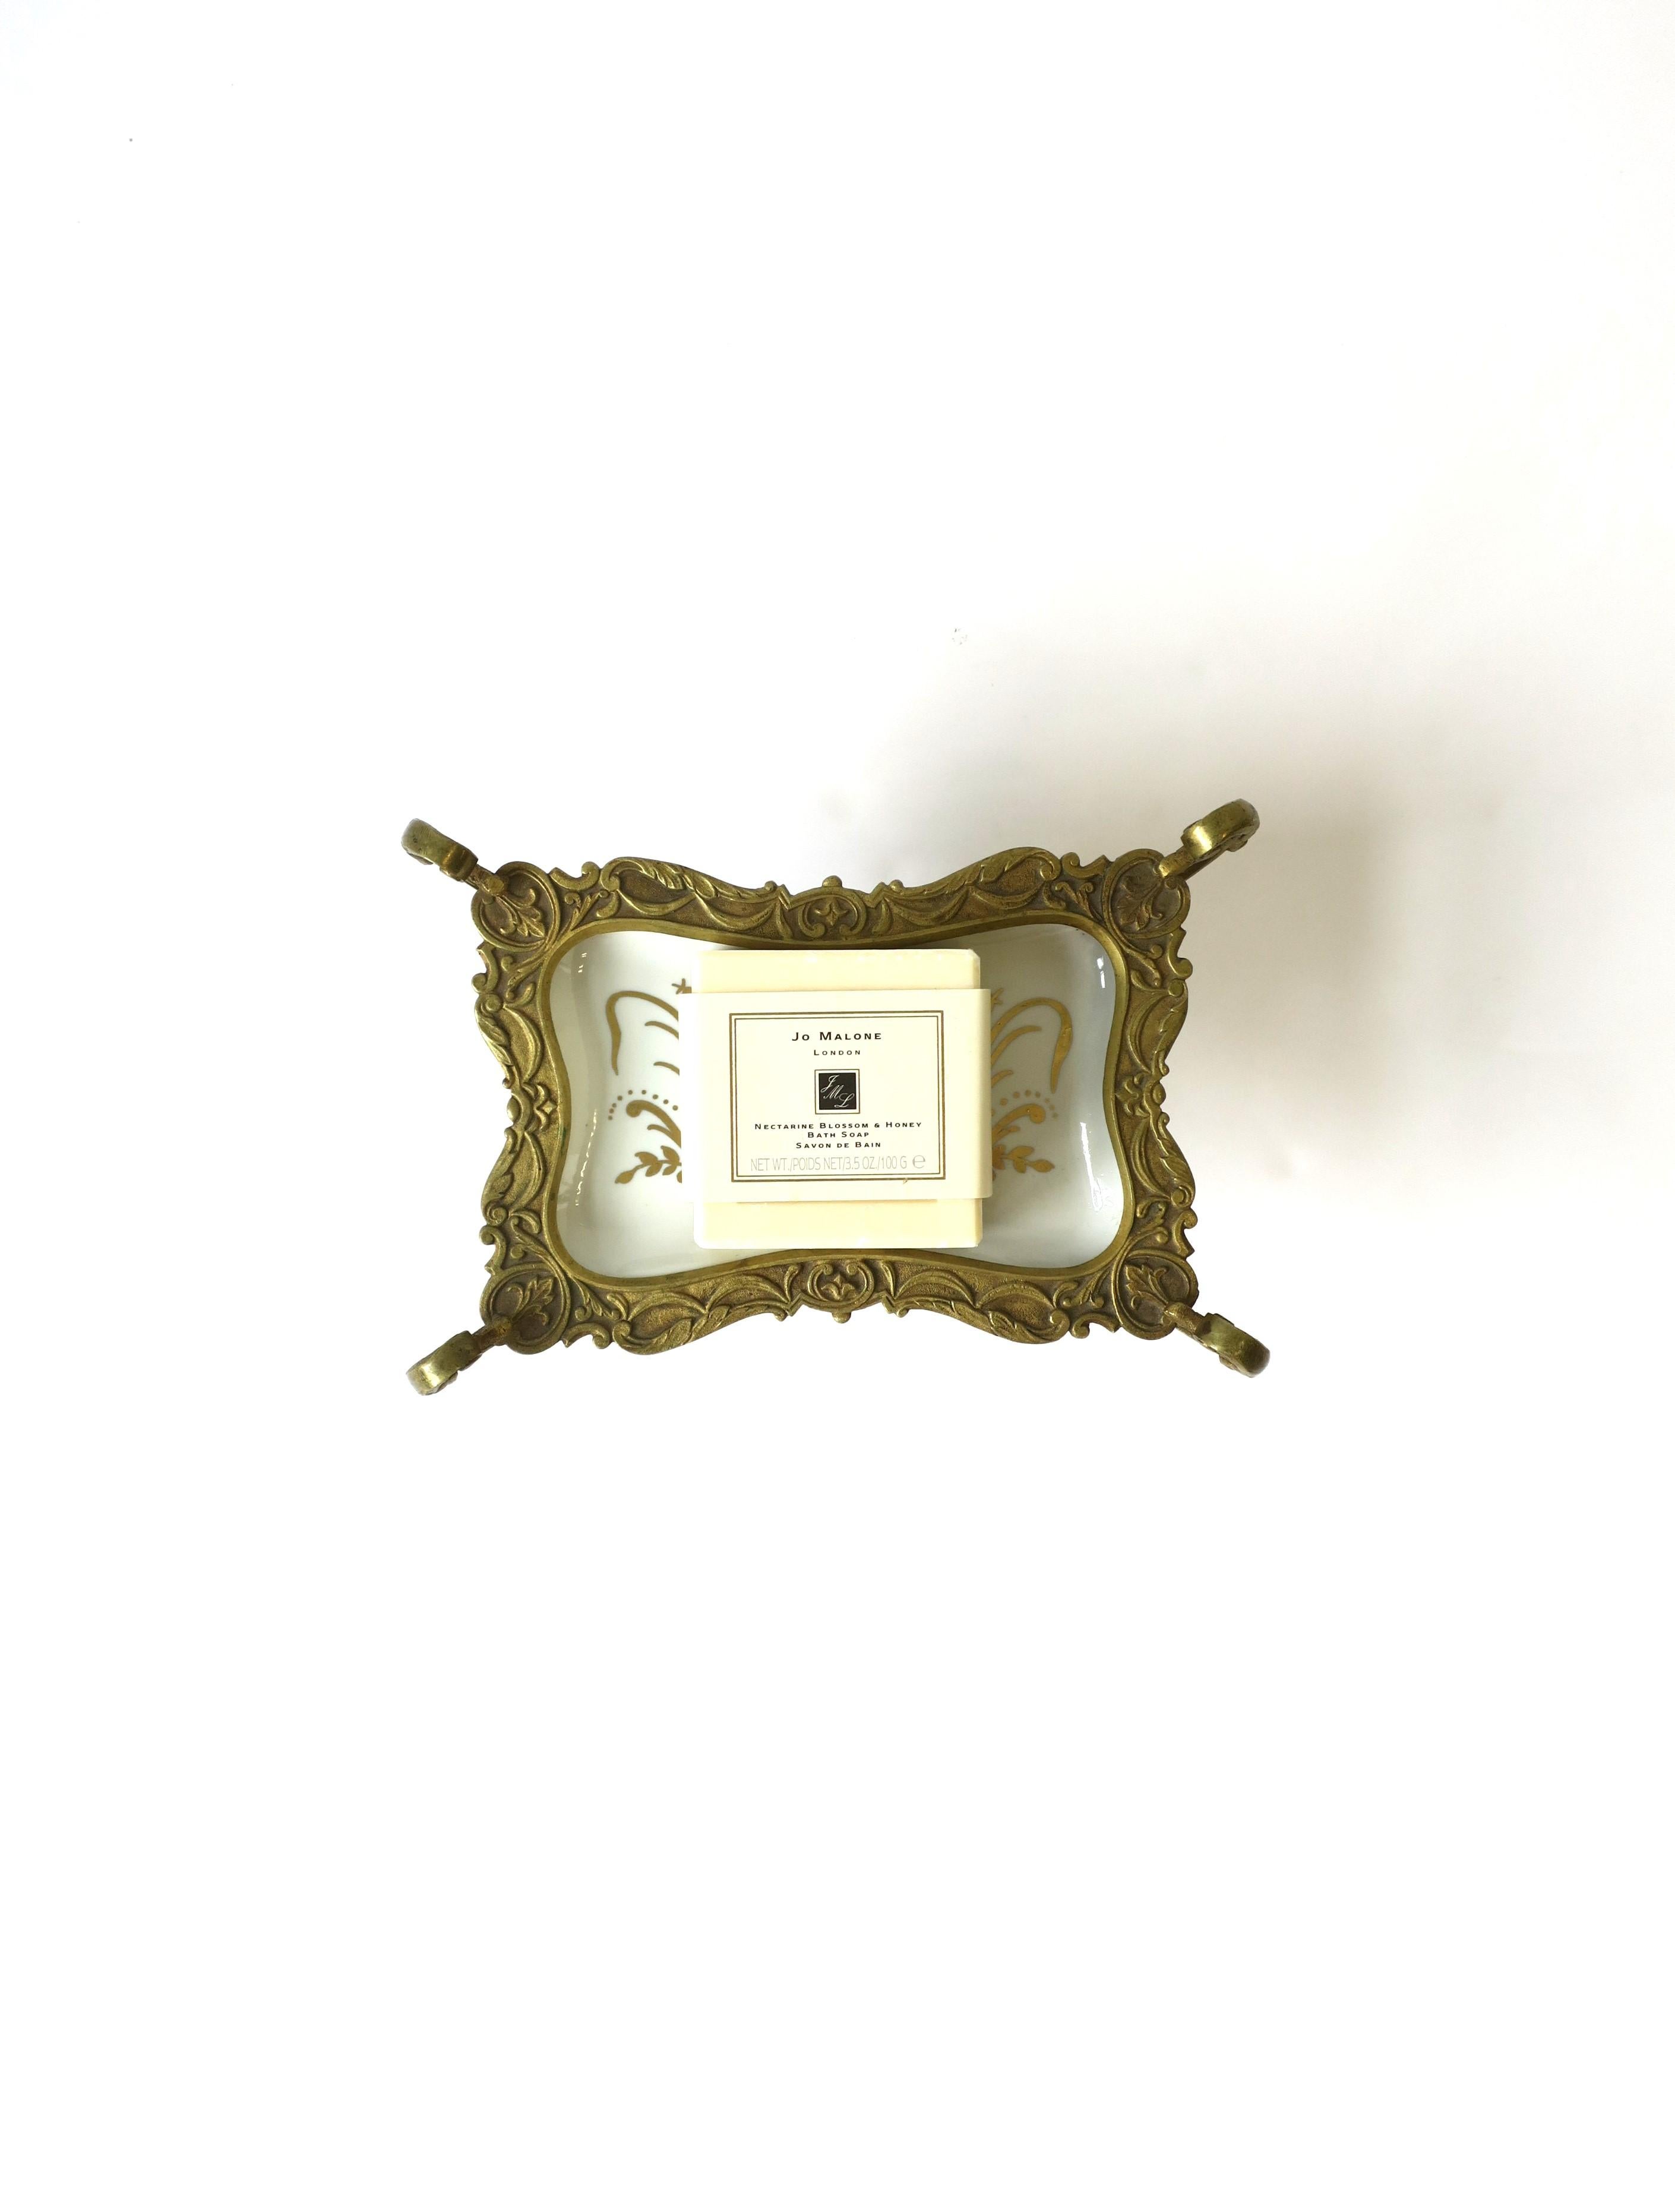 French Sevres Porcelain & Brass Ormolu Soap or Jewlery Dish Rococo, 18th Century For Sale 2